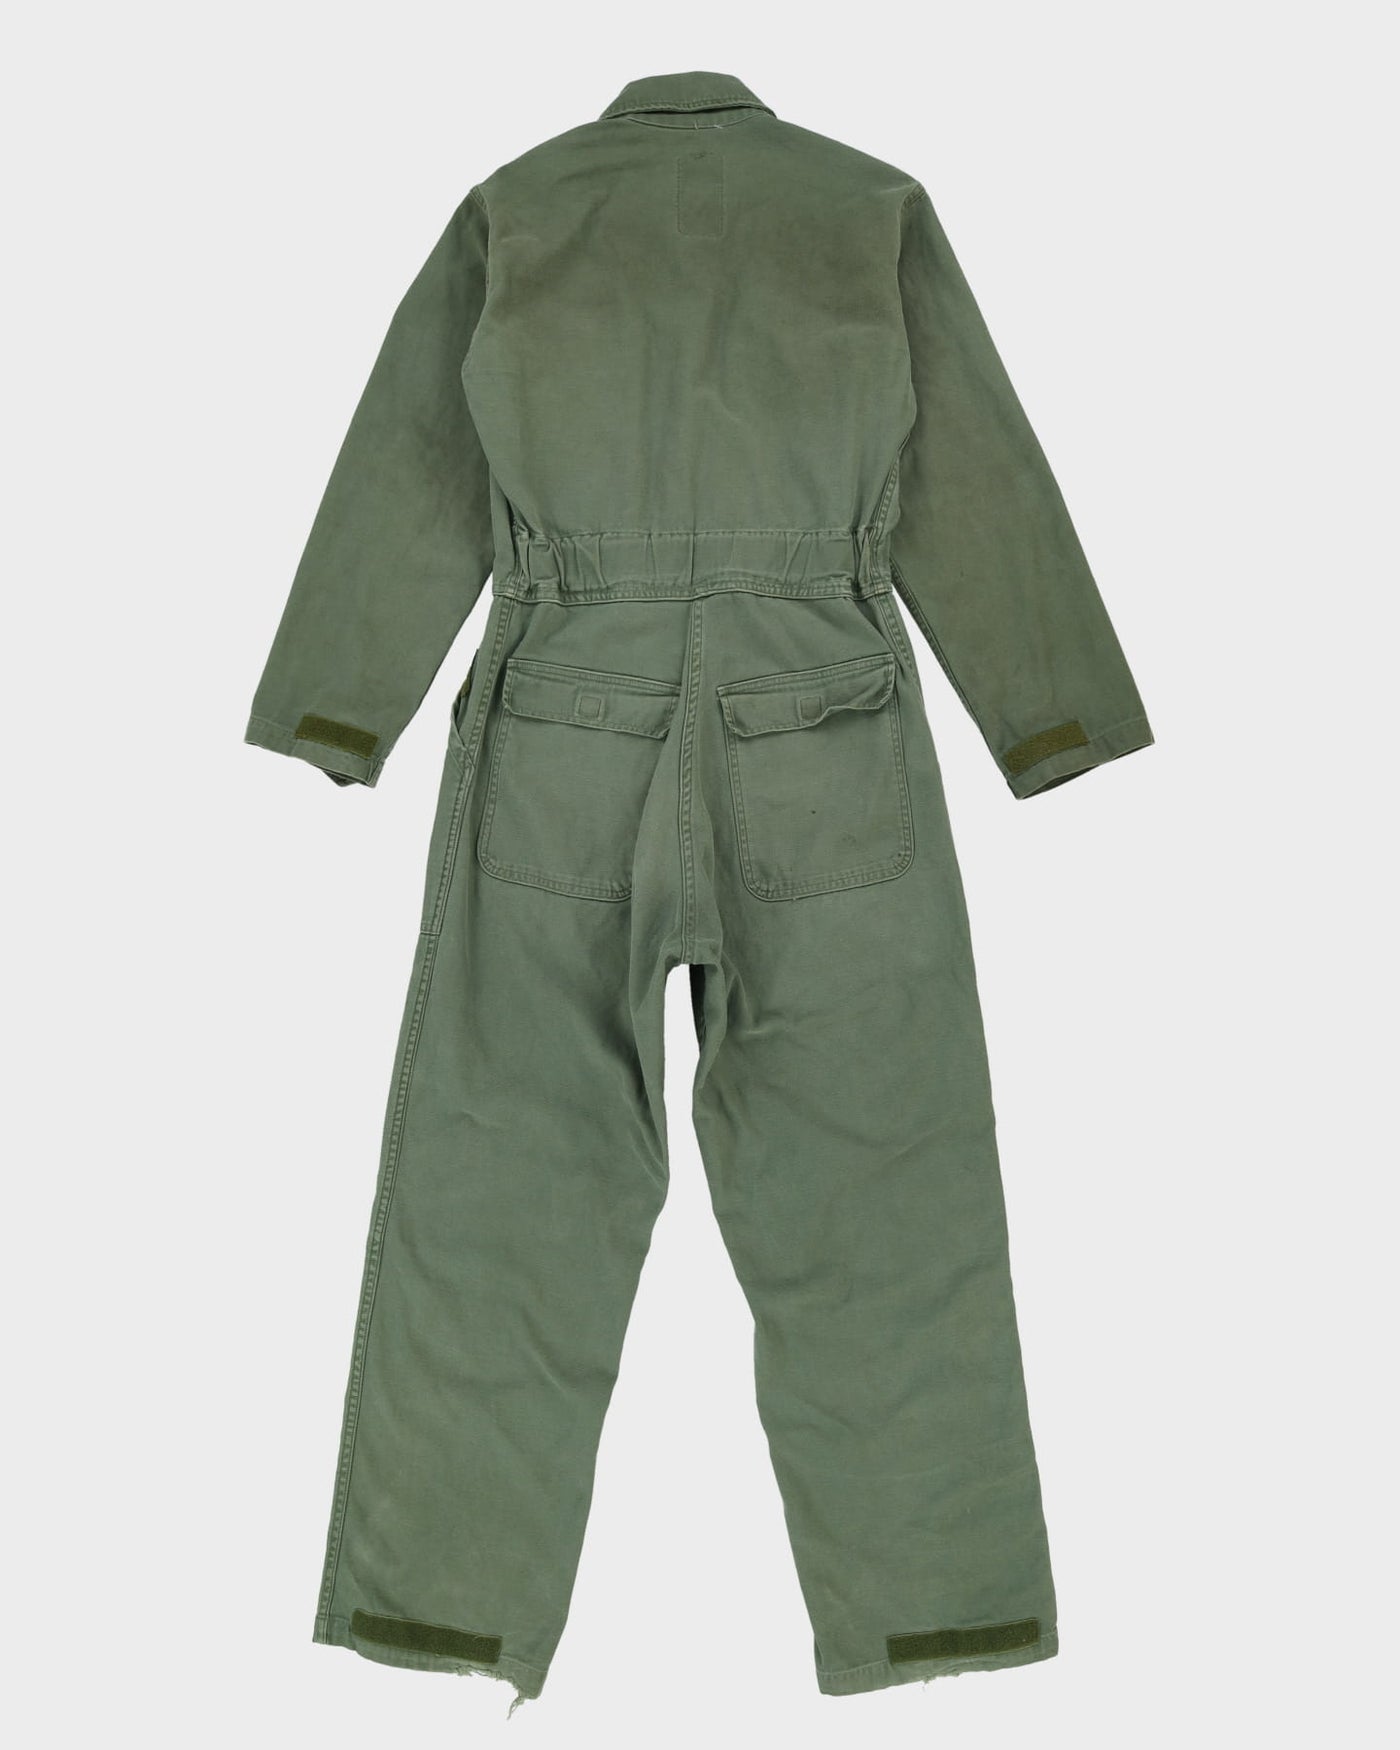 90s Vintage US Army Sateen Utility Coveralls - Small